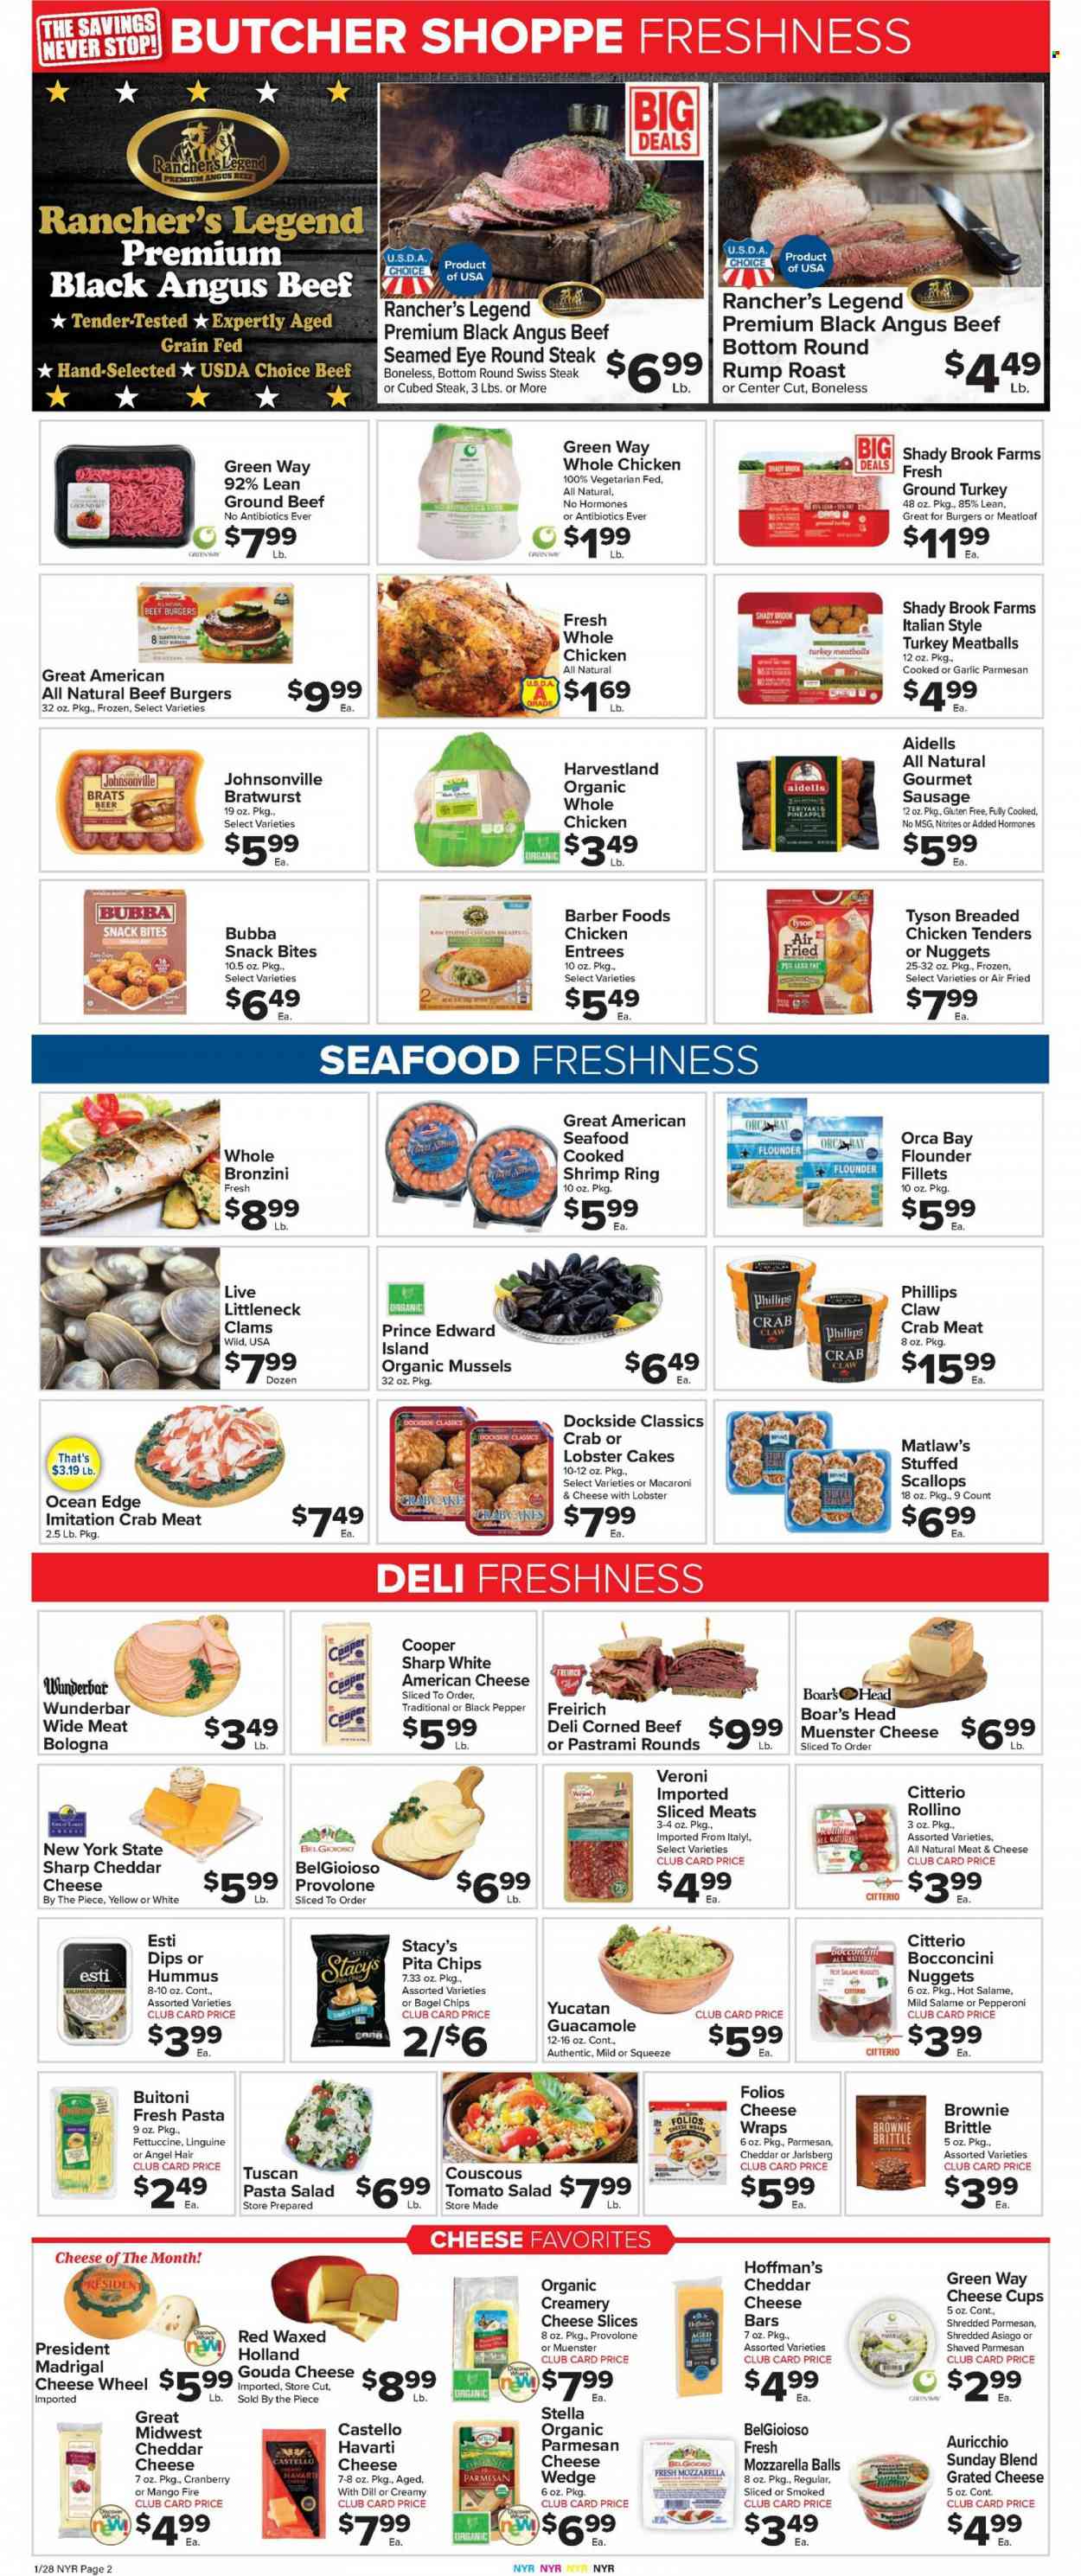 thumbnail - Foodtown Flyer - 01/28/2022 - 02/03/2022 - Sales products - cake, snack, pineapple, clams, fish fillets, flounder, mussels, scallops, seafood, Orca Bay, crab sticks, lobster cakes, meatballs, nuggets, hamburger, meatloaf, beef burger, Buitoni, Boar's Head, breaded chicken, salami, pastrami, salami wrapped cheese, bologna sausage, Johnsonville, sliced meat, bratwurst, pepperoni, hummus, guacamole, pasta salad, corned beef, american cheese, asiago, bocconcini, gouda, shredded cheese, sliced cheese, Havarti, cheddar, cheese cup, Münster cheese, grated cheese, Président, Provolone, dip, cookies, Brownie Brittle, bars, bagel crisps, pita chips, couscous, black pepper, alcohol, beer, ground turkey, whole chicken, turkey, steak, beef tenderloin, round steak. Page 2.